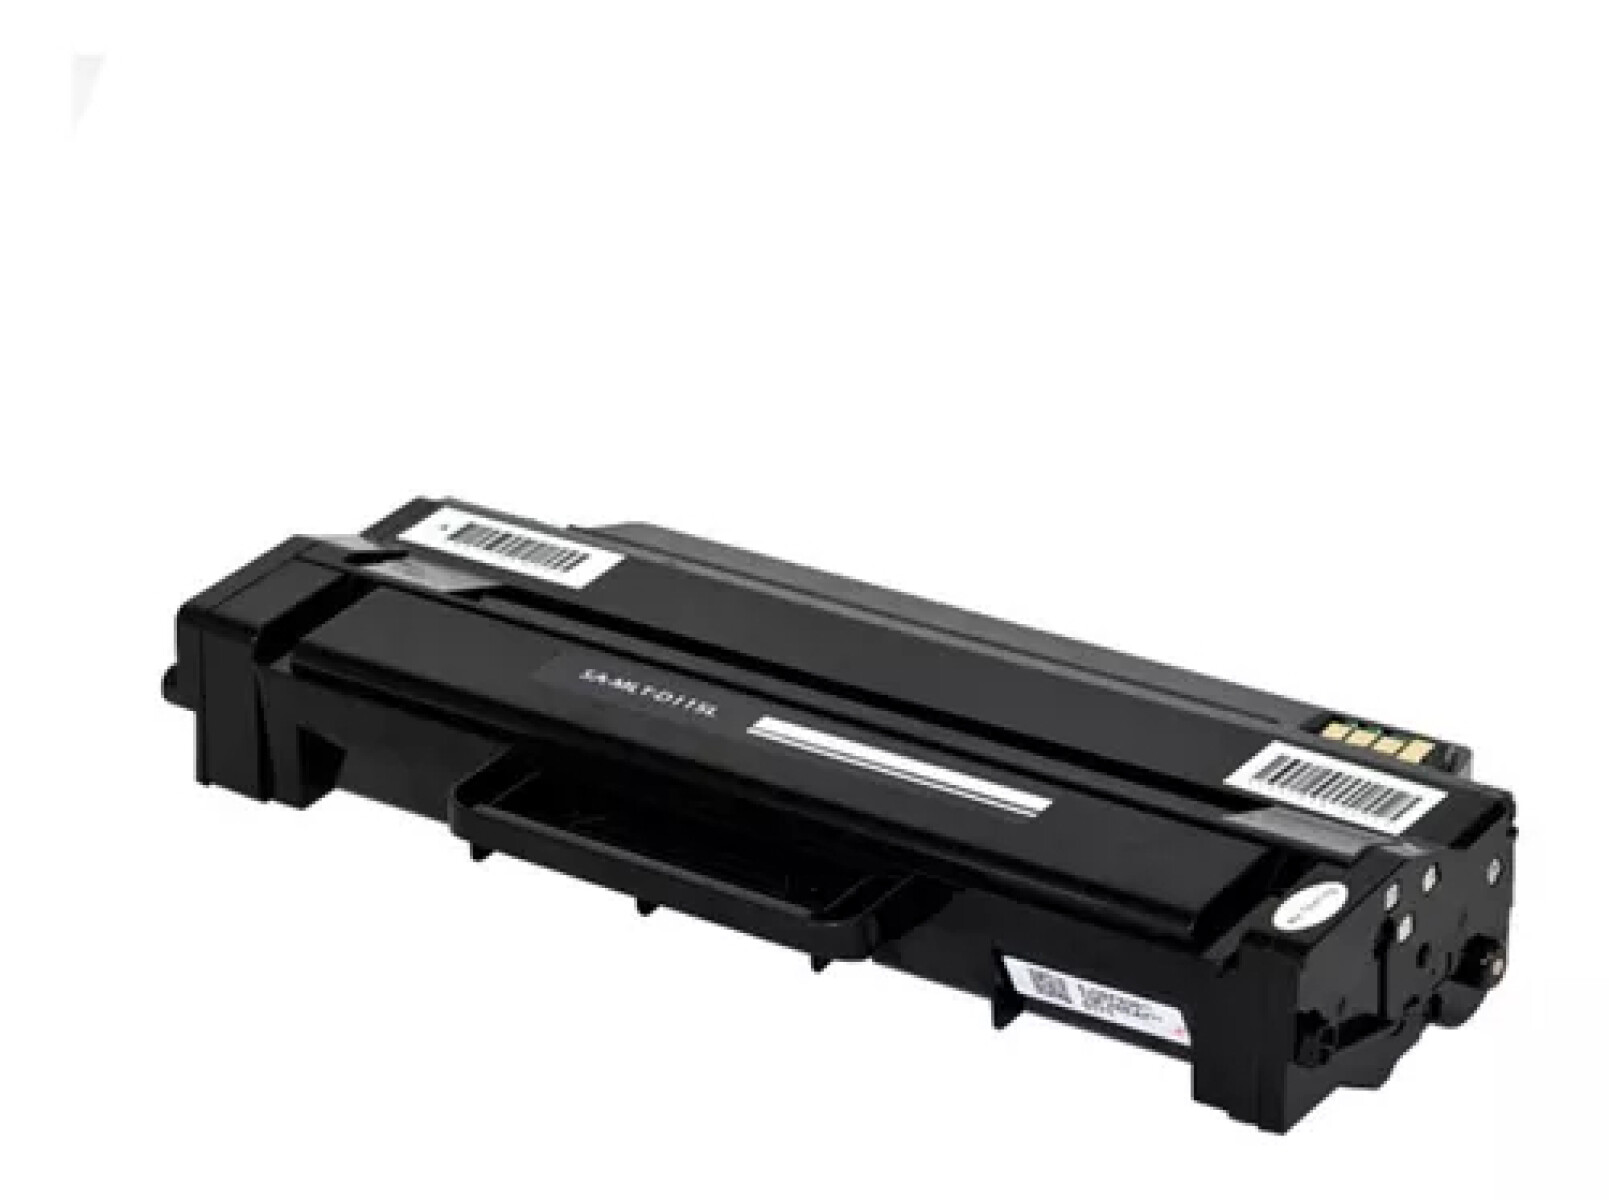 SAMSUNG TONER 115L NEGRO 2620/70/2820/2830/2870/2880 3000CPS - Samsung Toner 115l Negro 2620/70/2820/2830/2870/2880 3000cps 